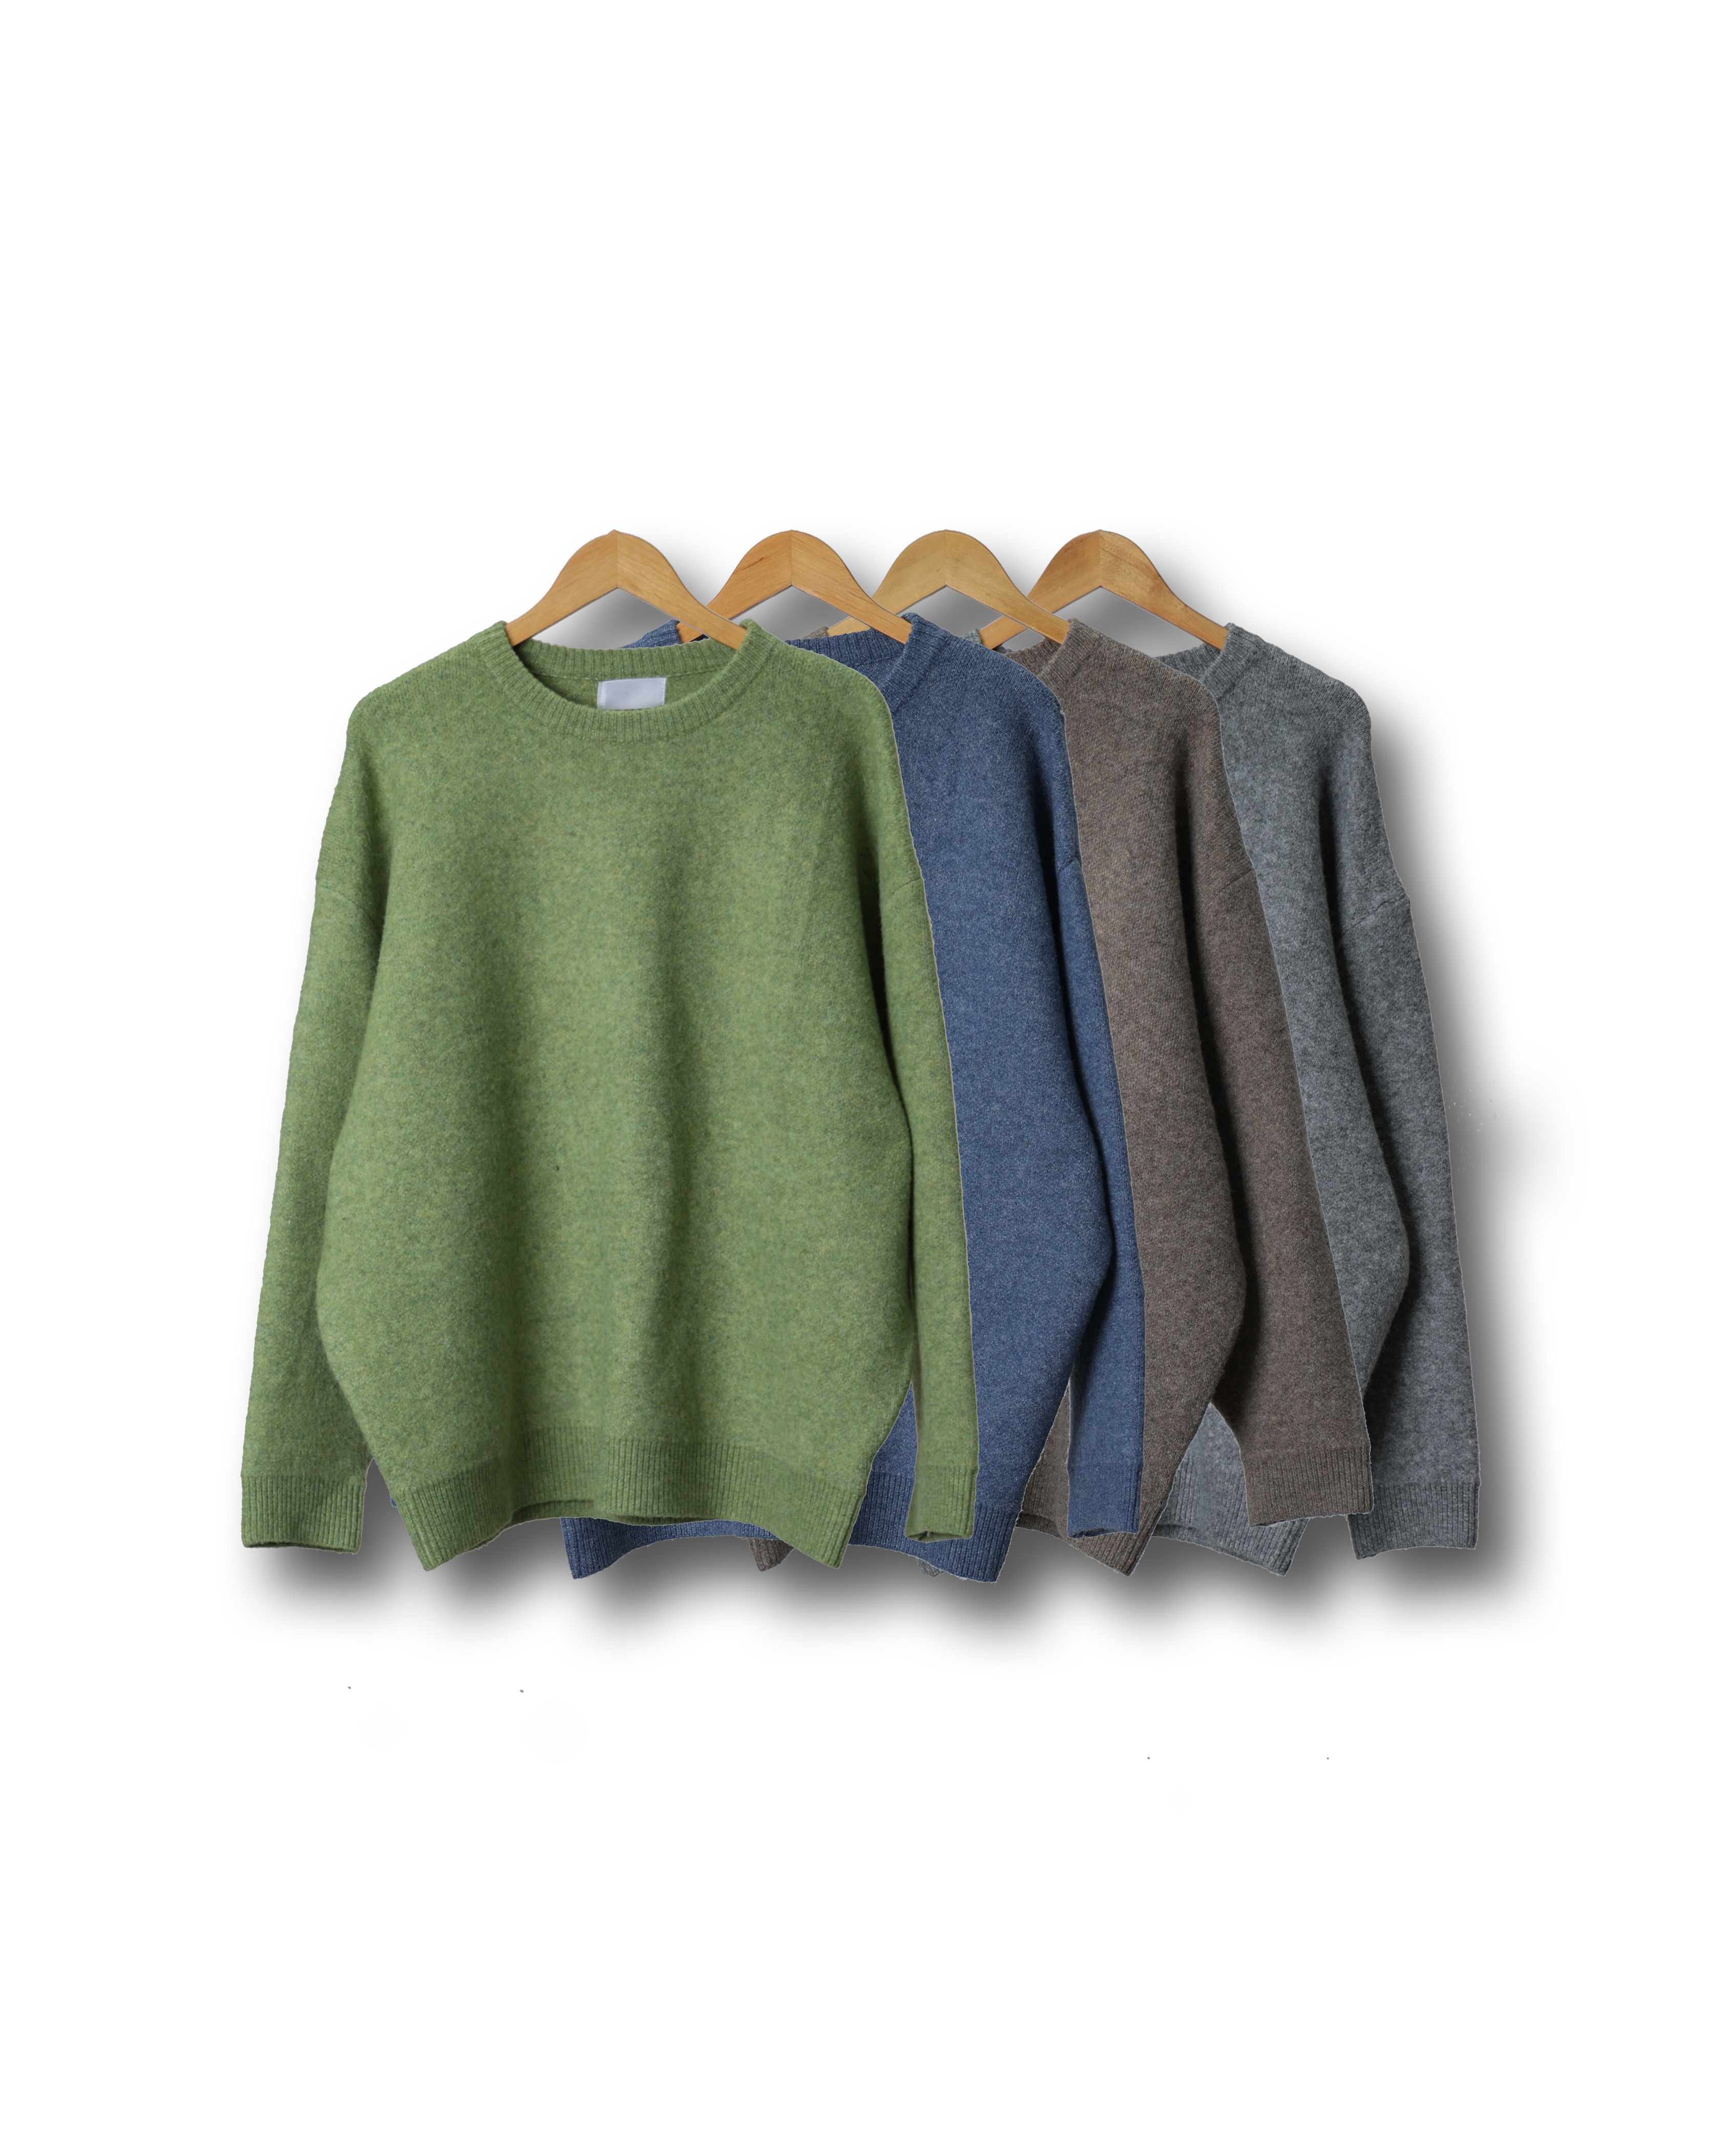 NOOR Wool Round Bulky Over Knit (Gray/Light Brown/Deep Blue/Light Olive)